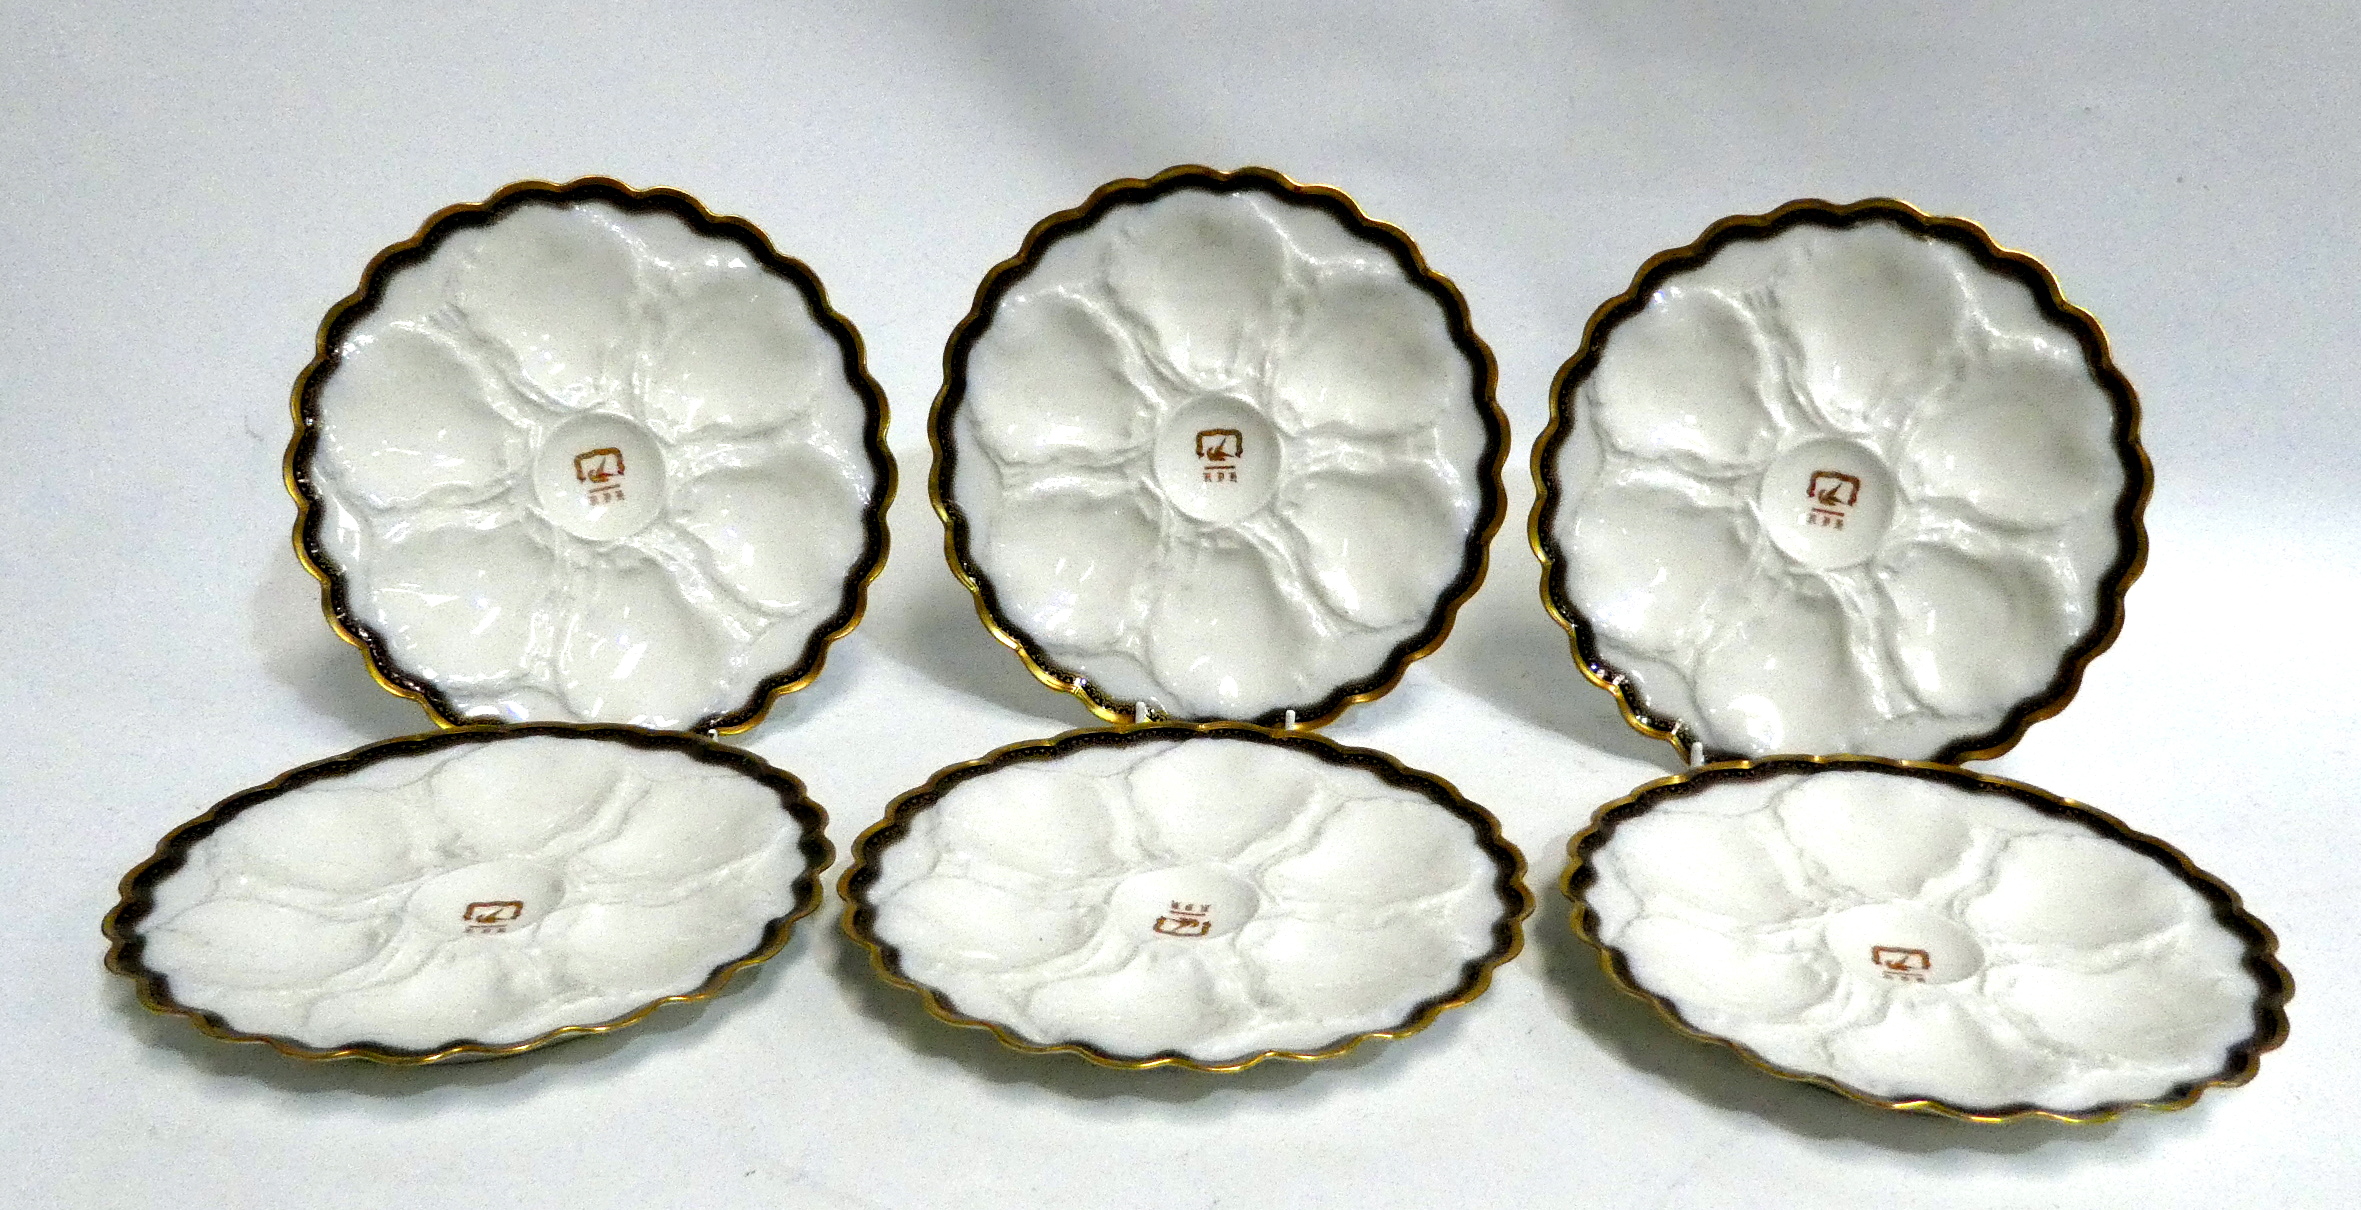 A set of six early 20th century French oyster plates - moulded with a gilt rim and ownership